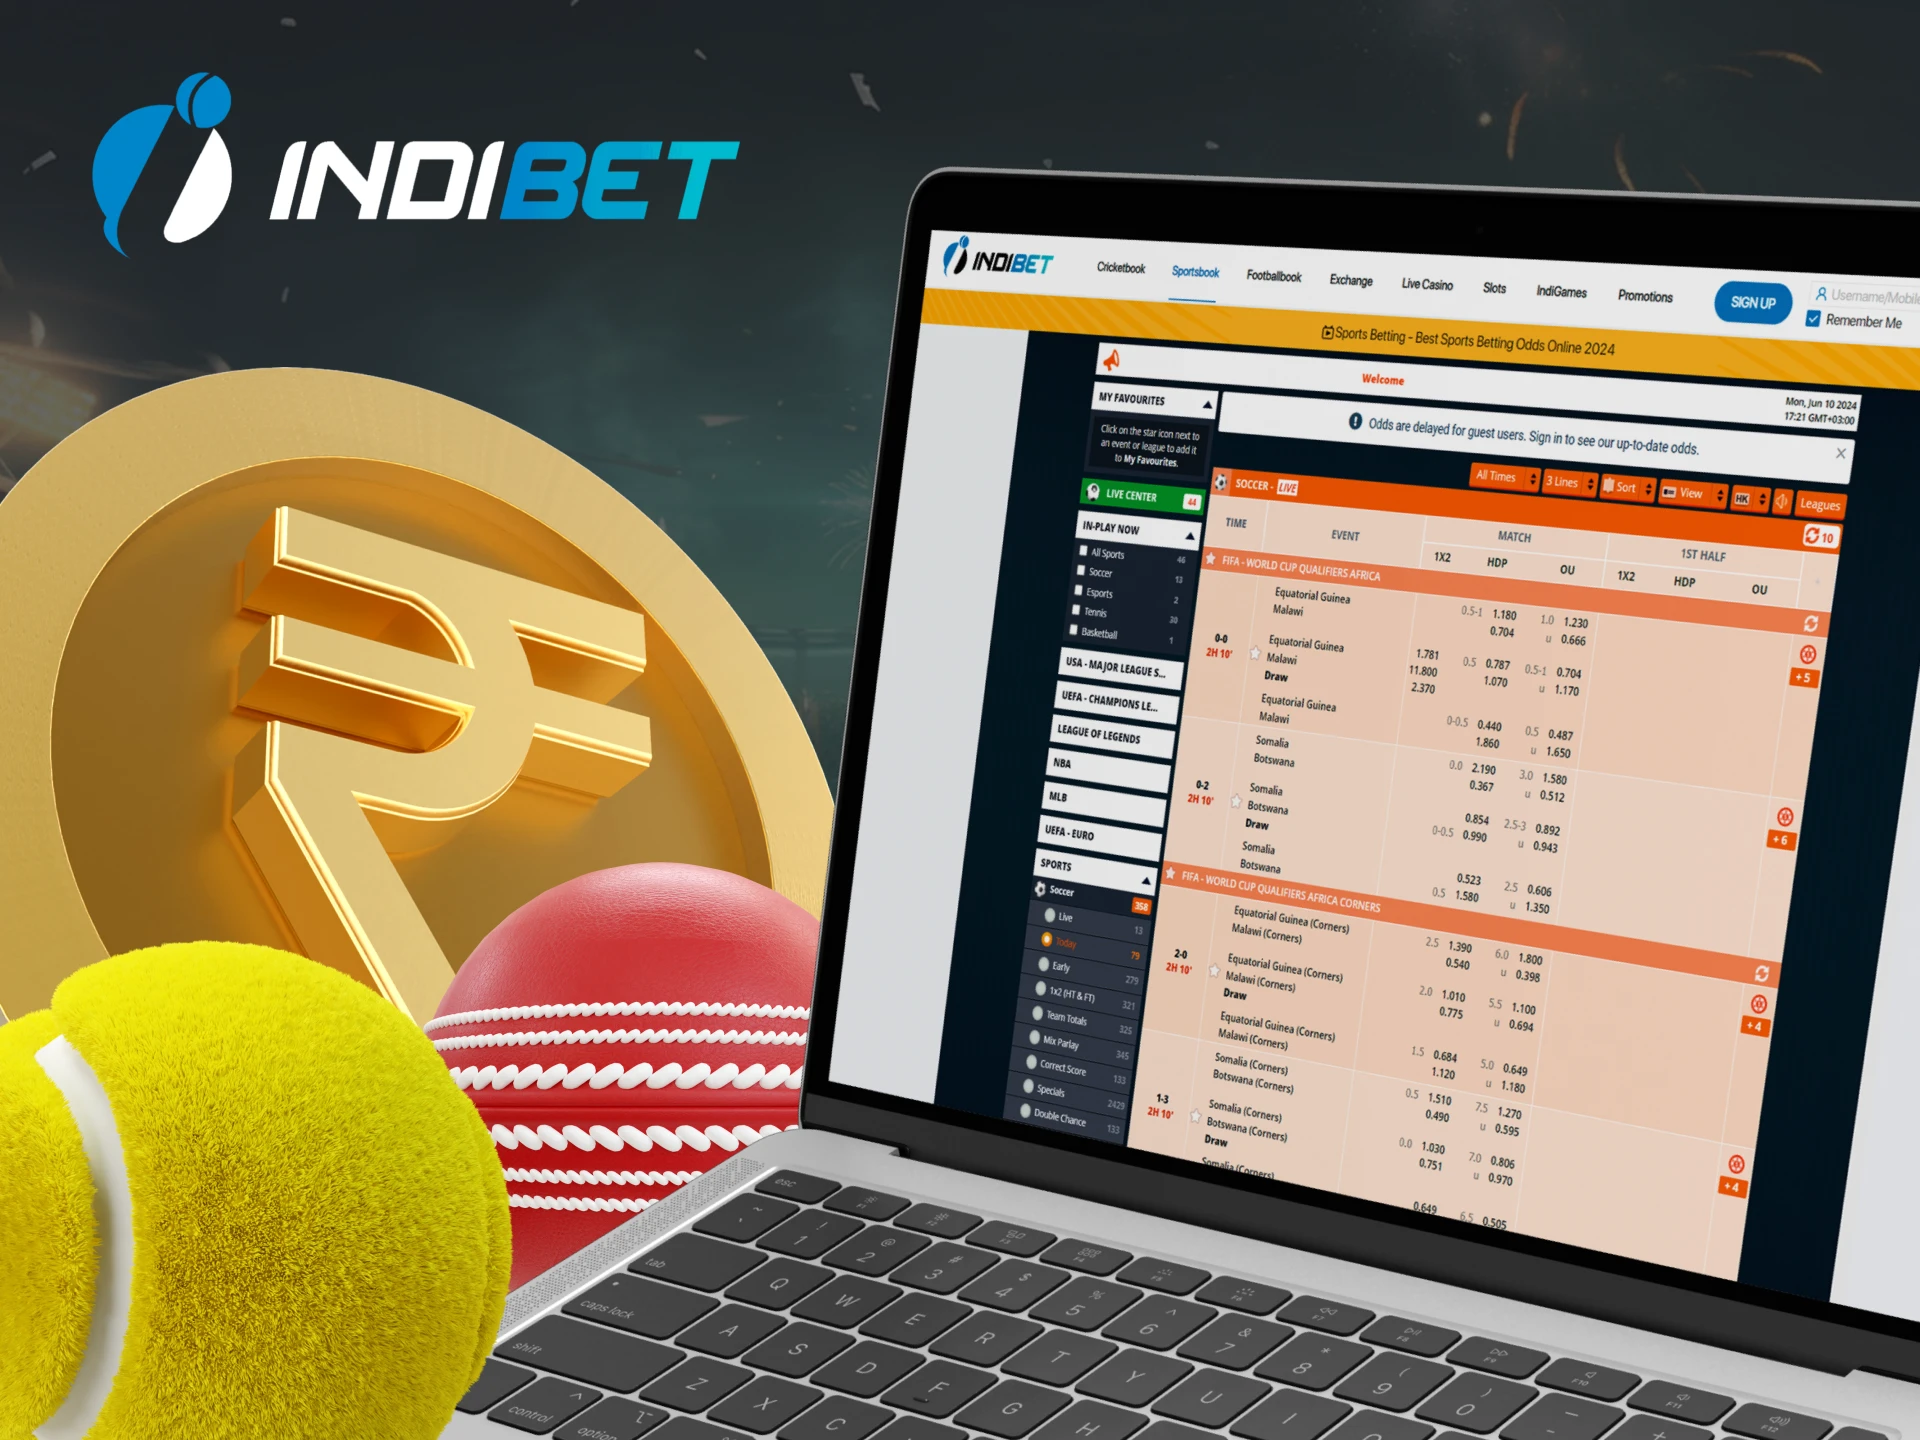 Bet on your favorite sports with Indibet.